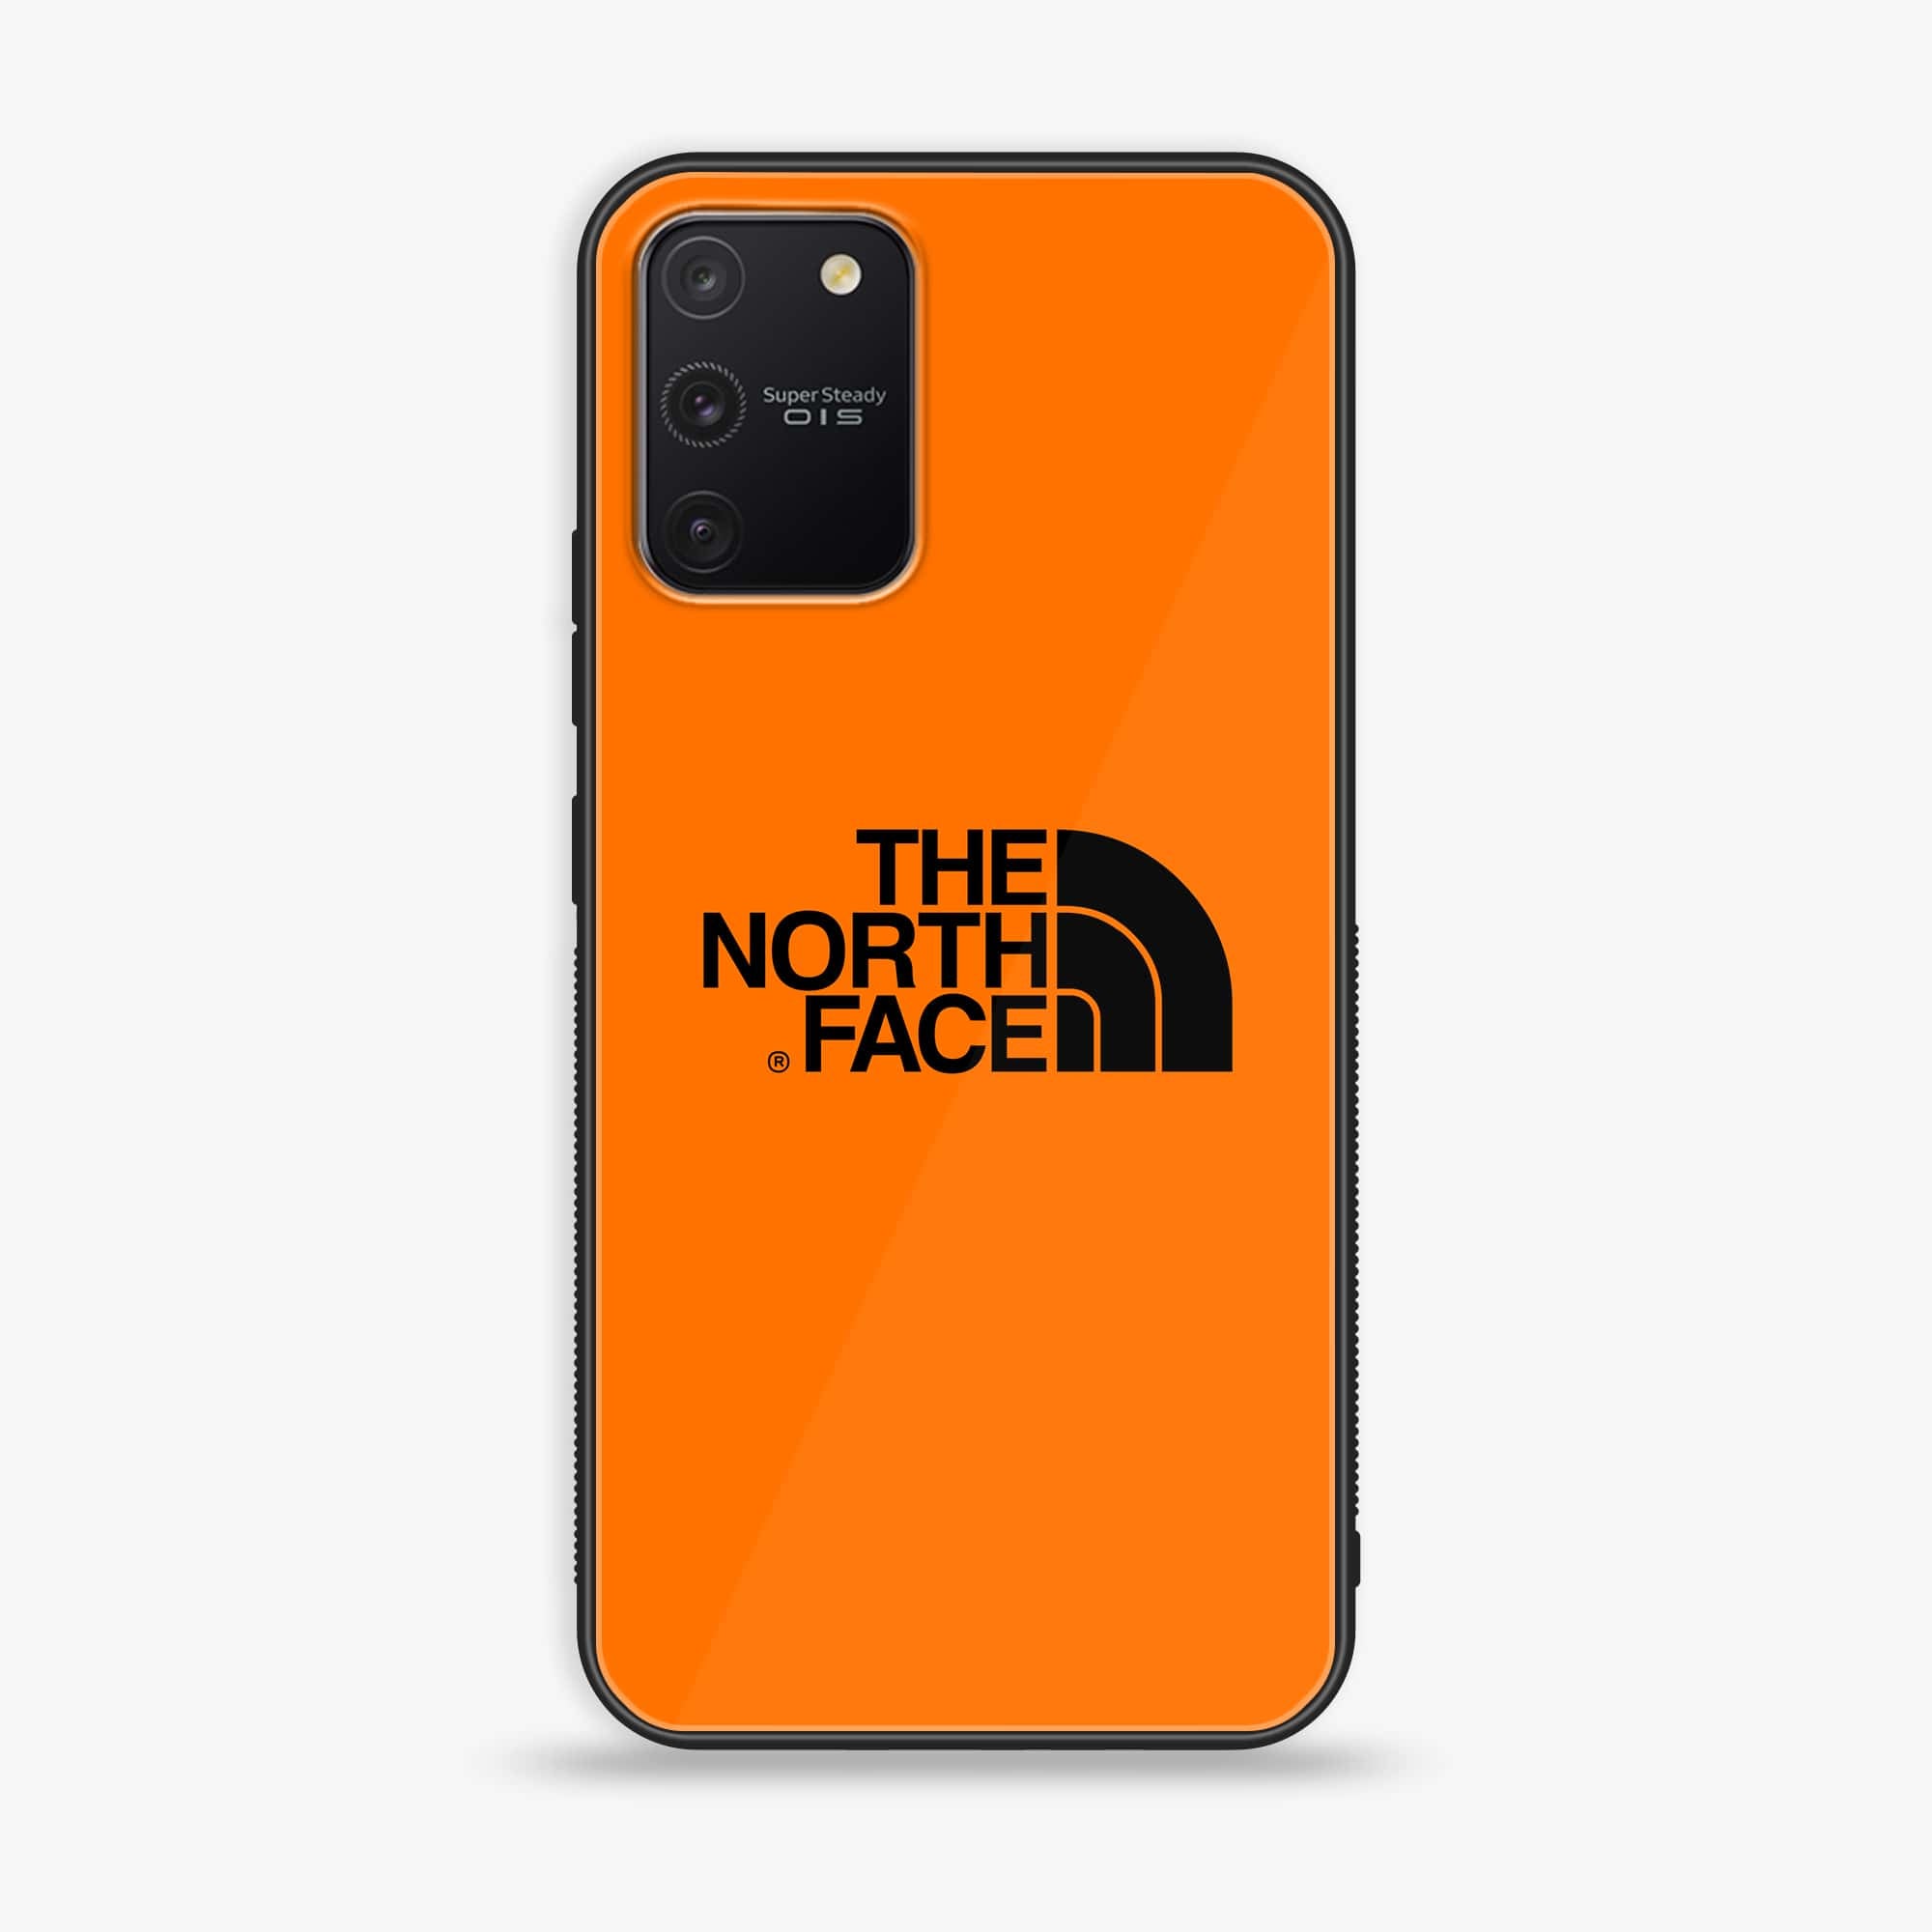 Galaxy S10 Lite - The North Face Series - Premium Printed Glass soft Bumper shock Proof Case